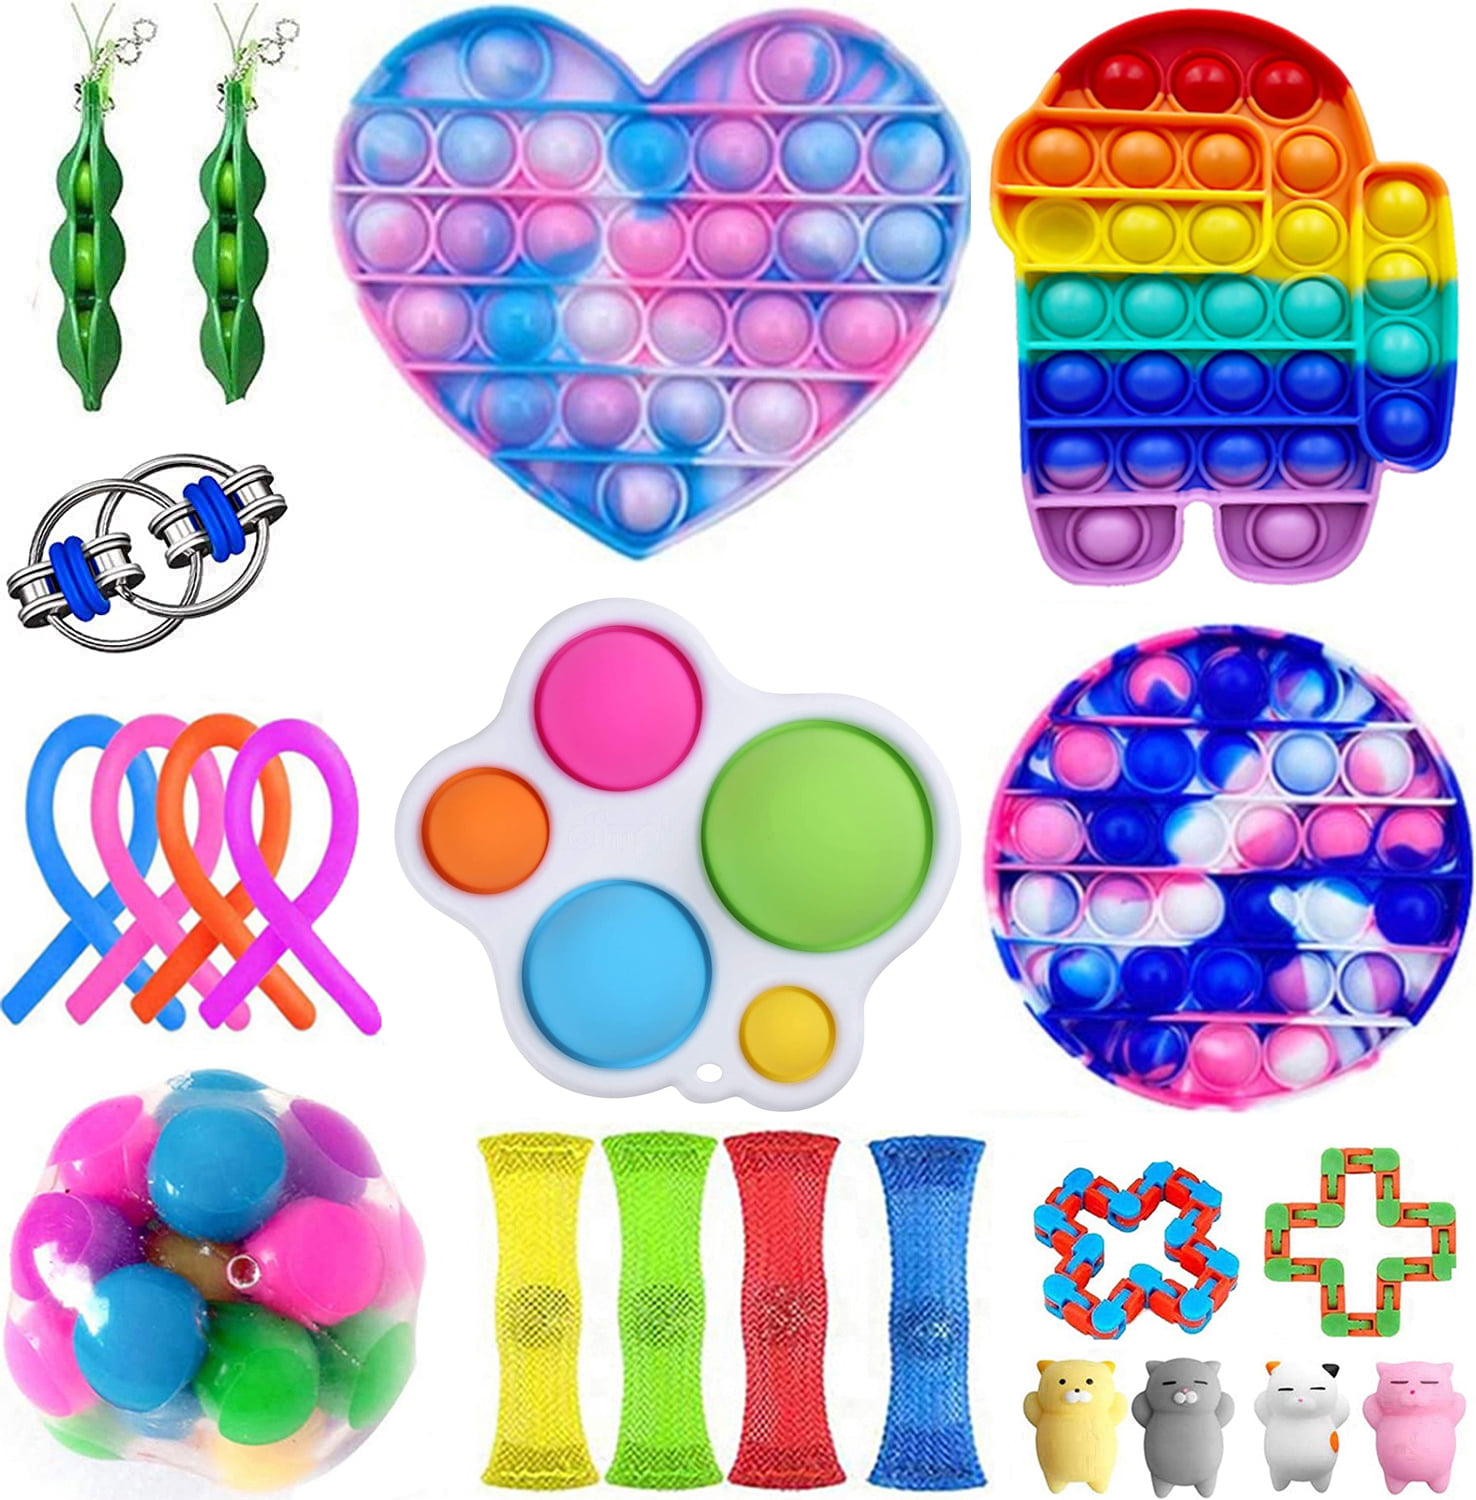 Details about   Simple Dimple Fidget Toys Stress Relief and Anti-Anxiety Tool Baby Sensory Toy 